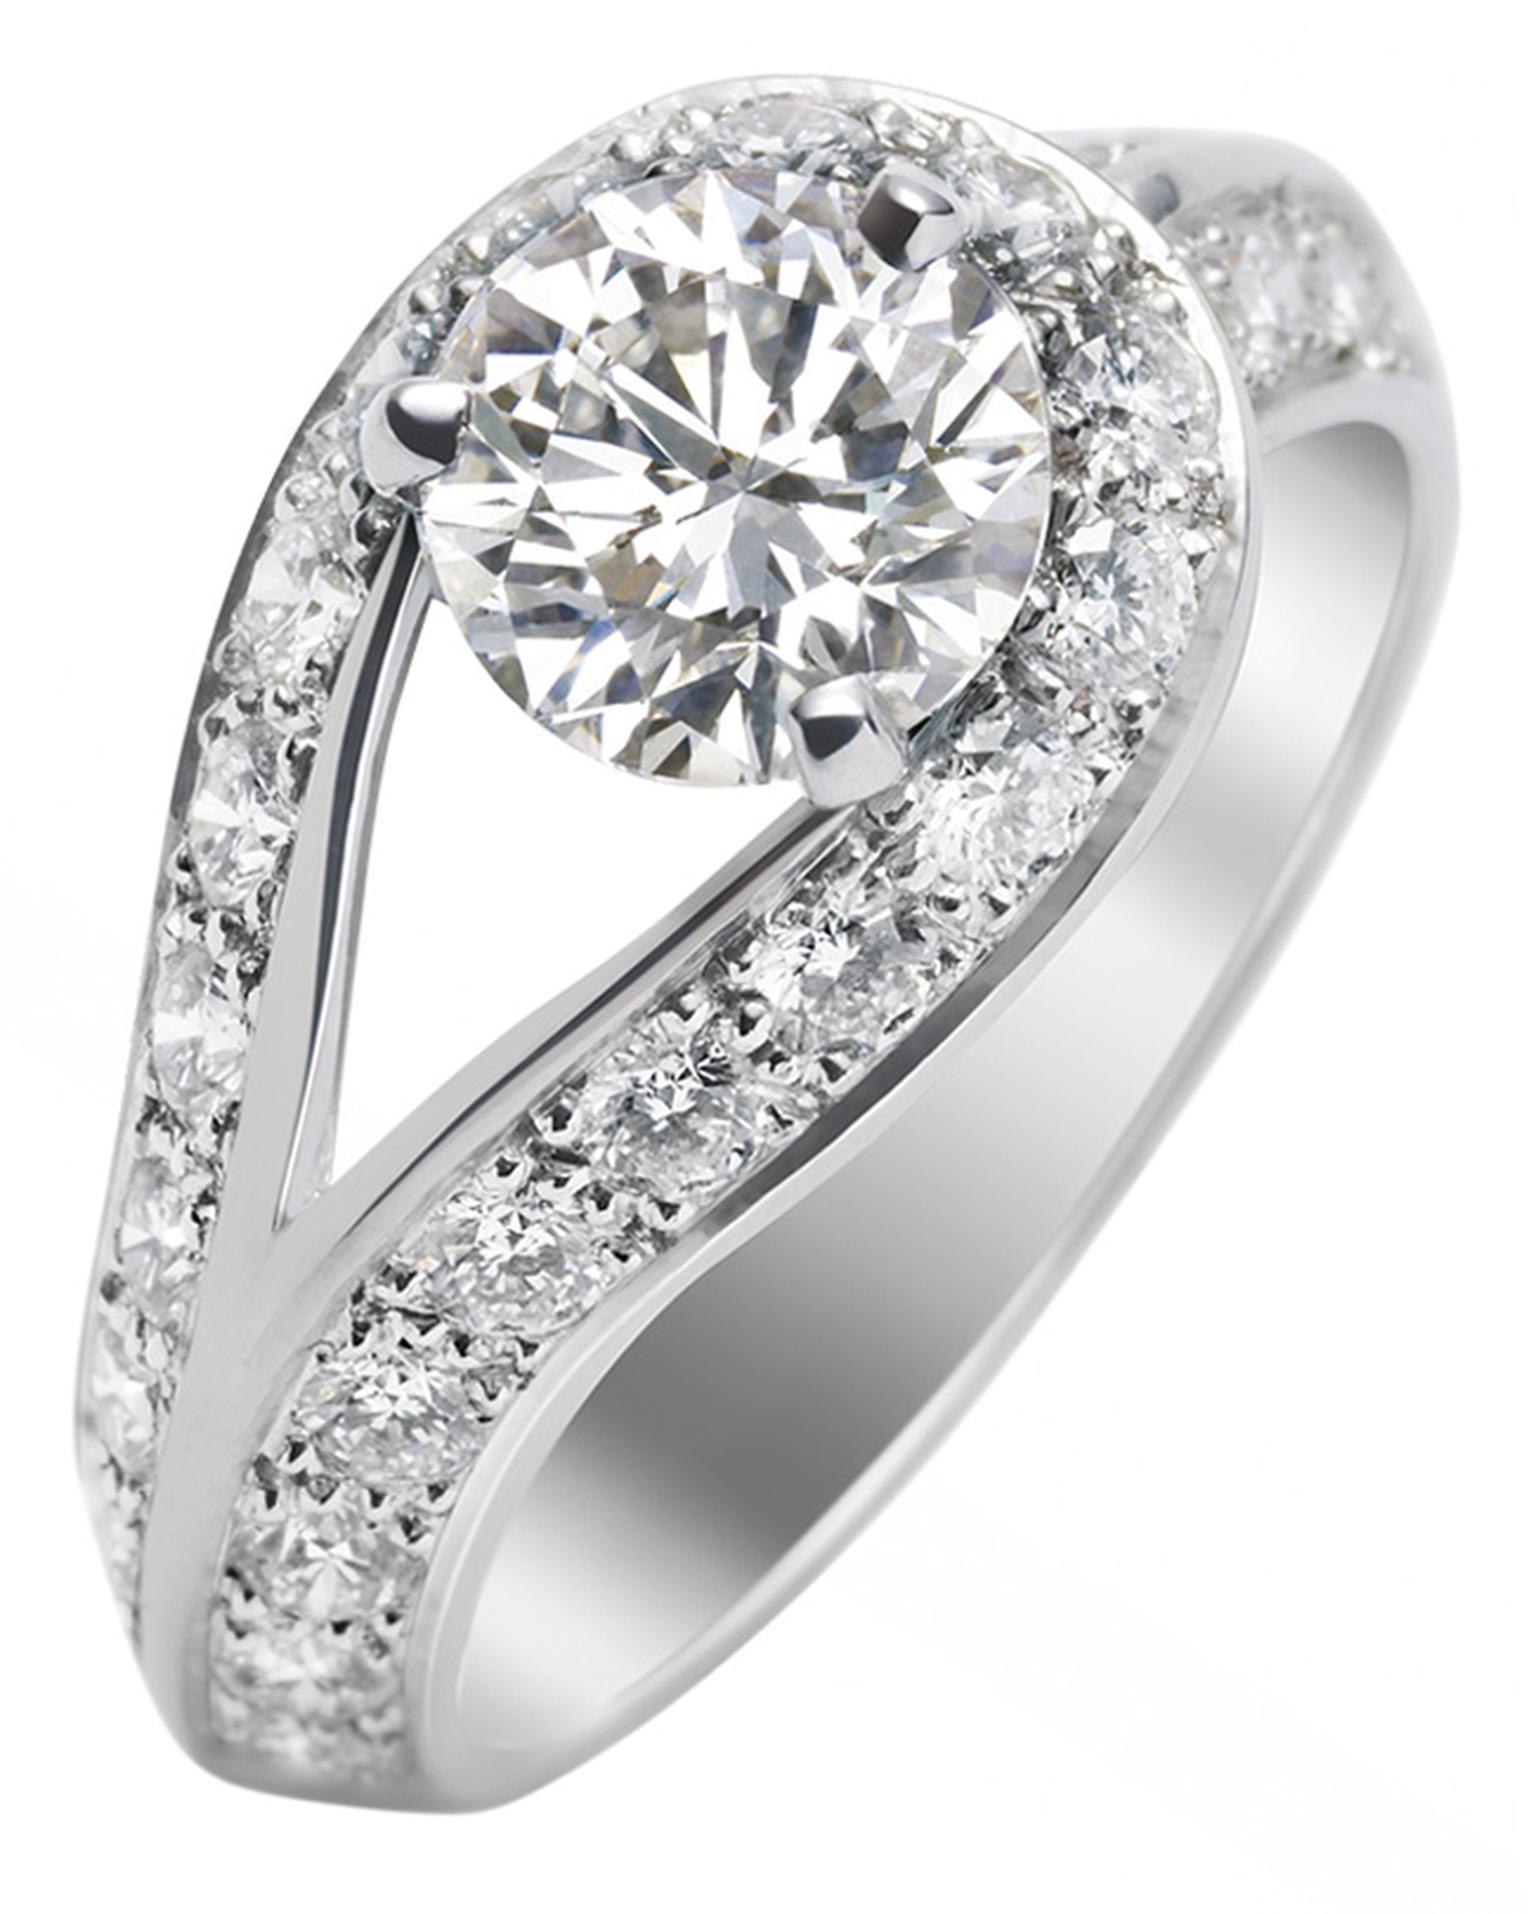 Van Cleef & Arpels Solitaire Couture engagement ring_20130619_Main